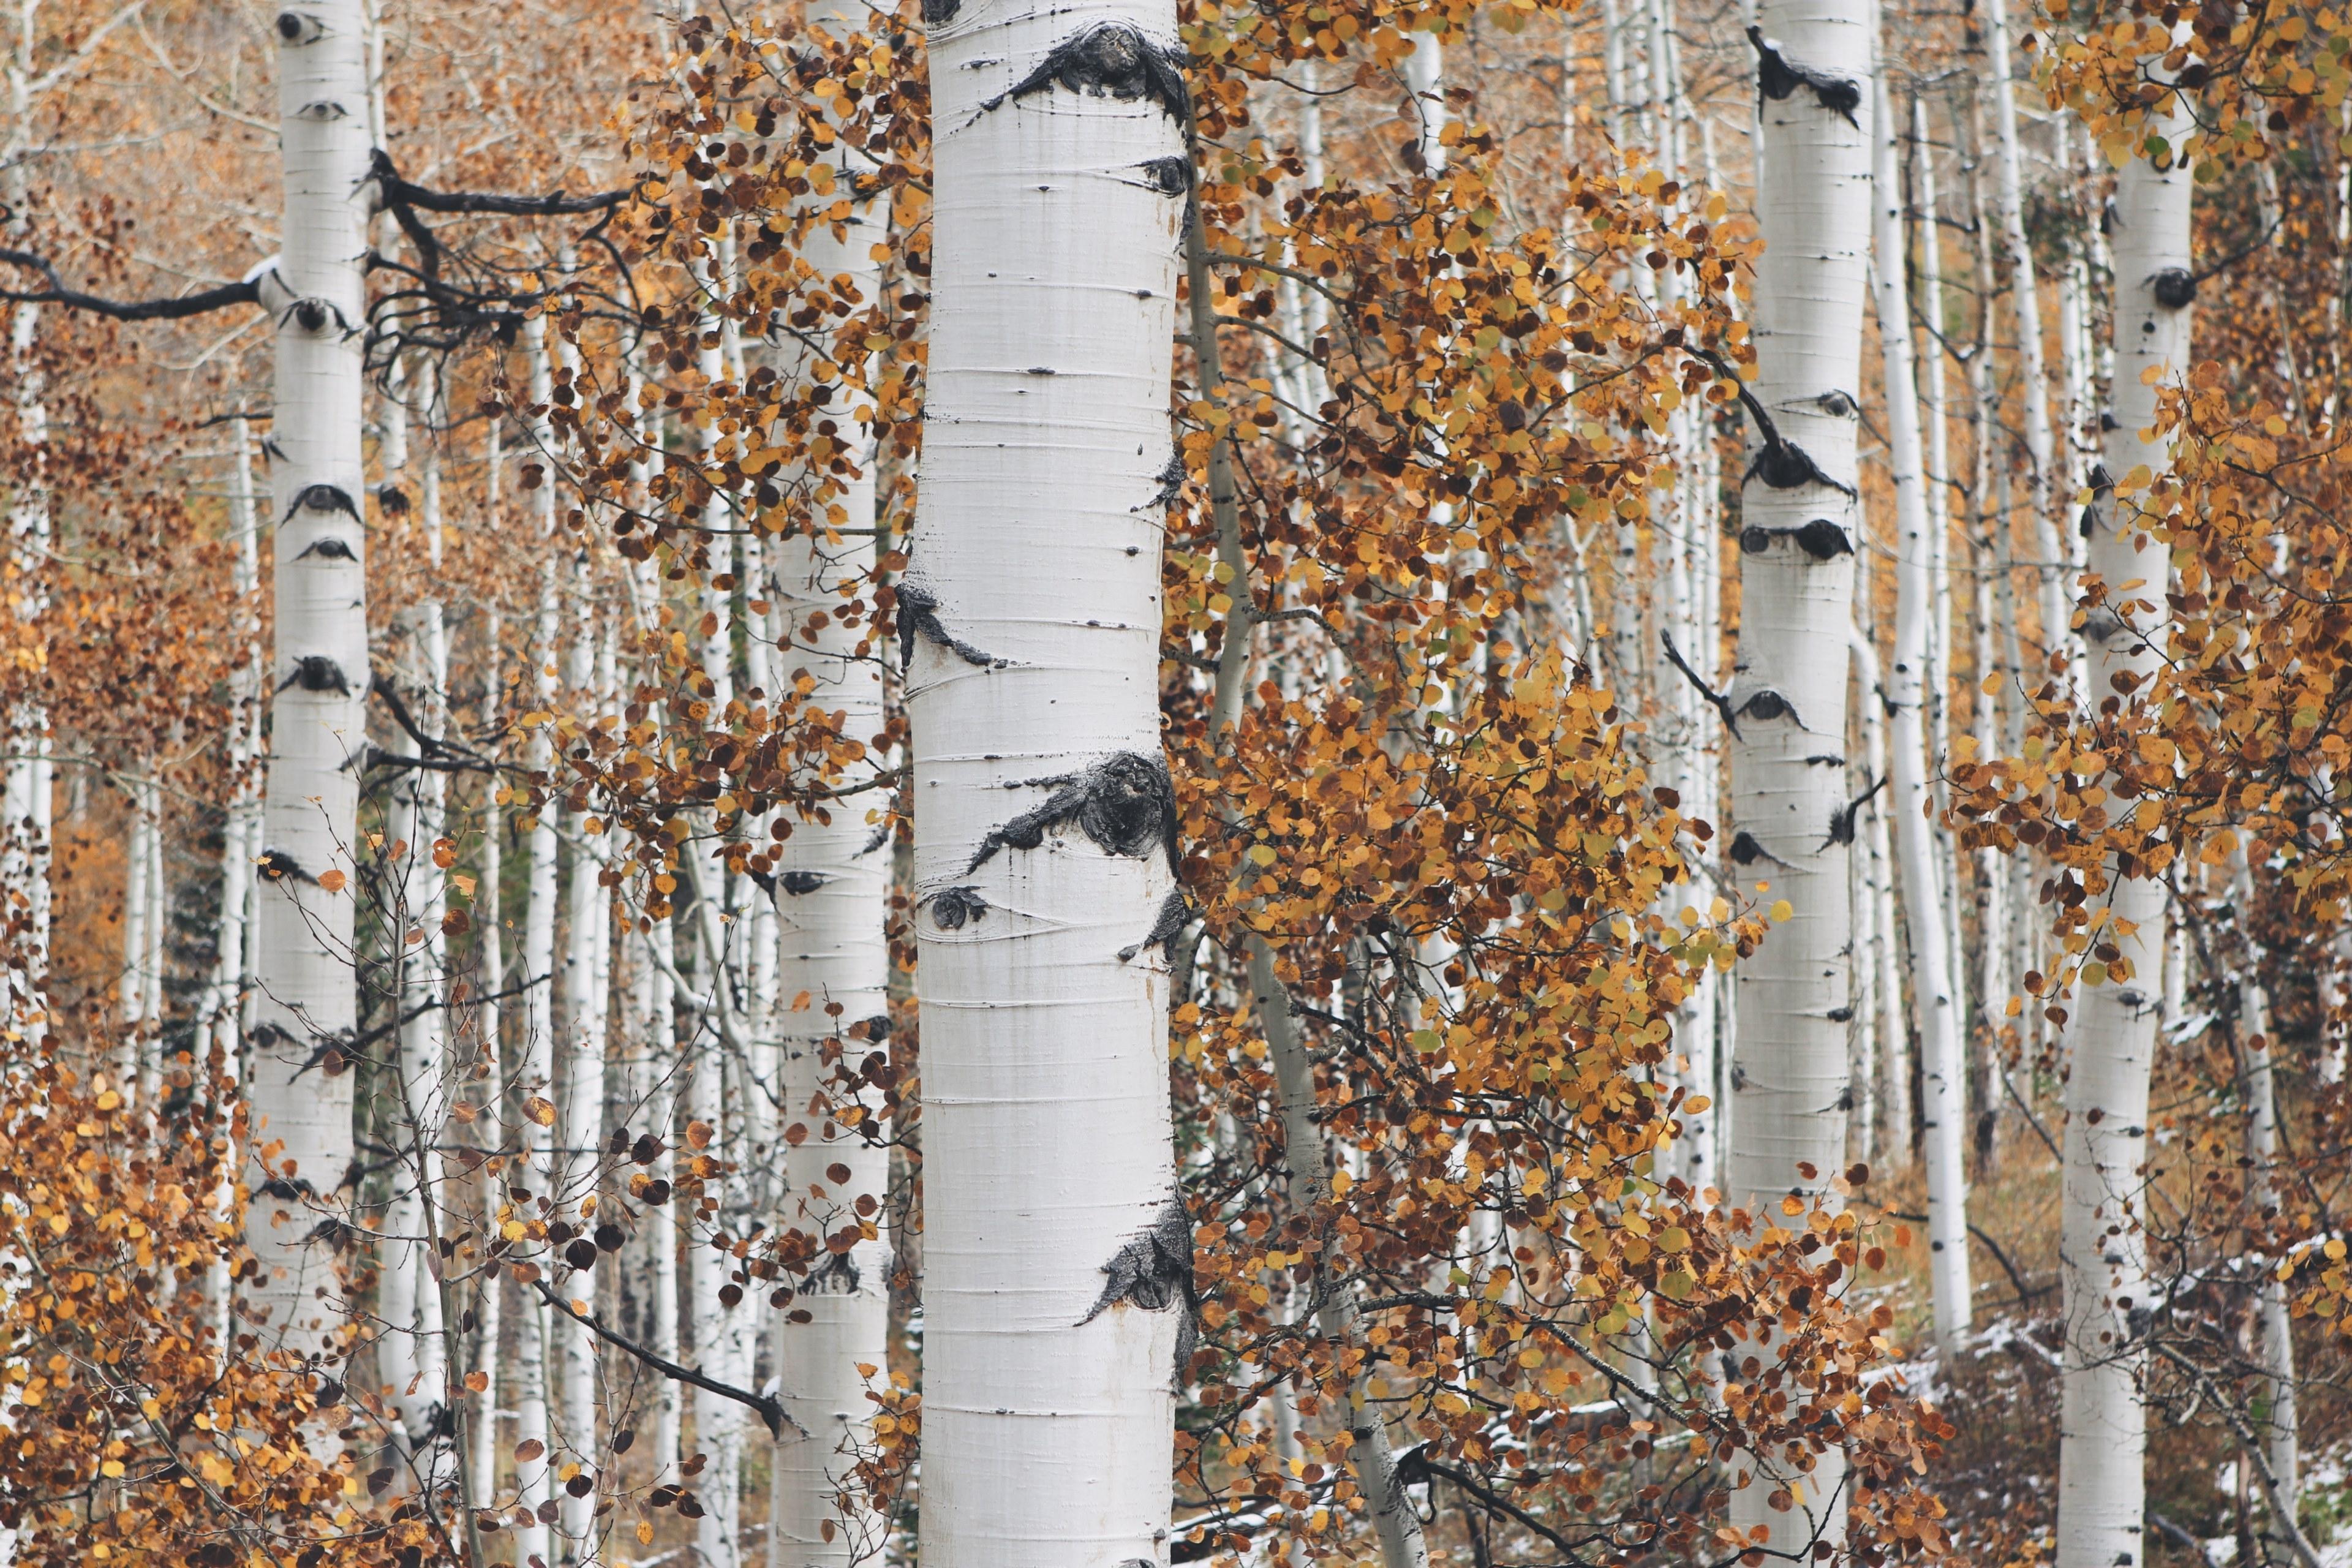 grey and white birch tree trunks with orange and brown